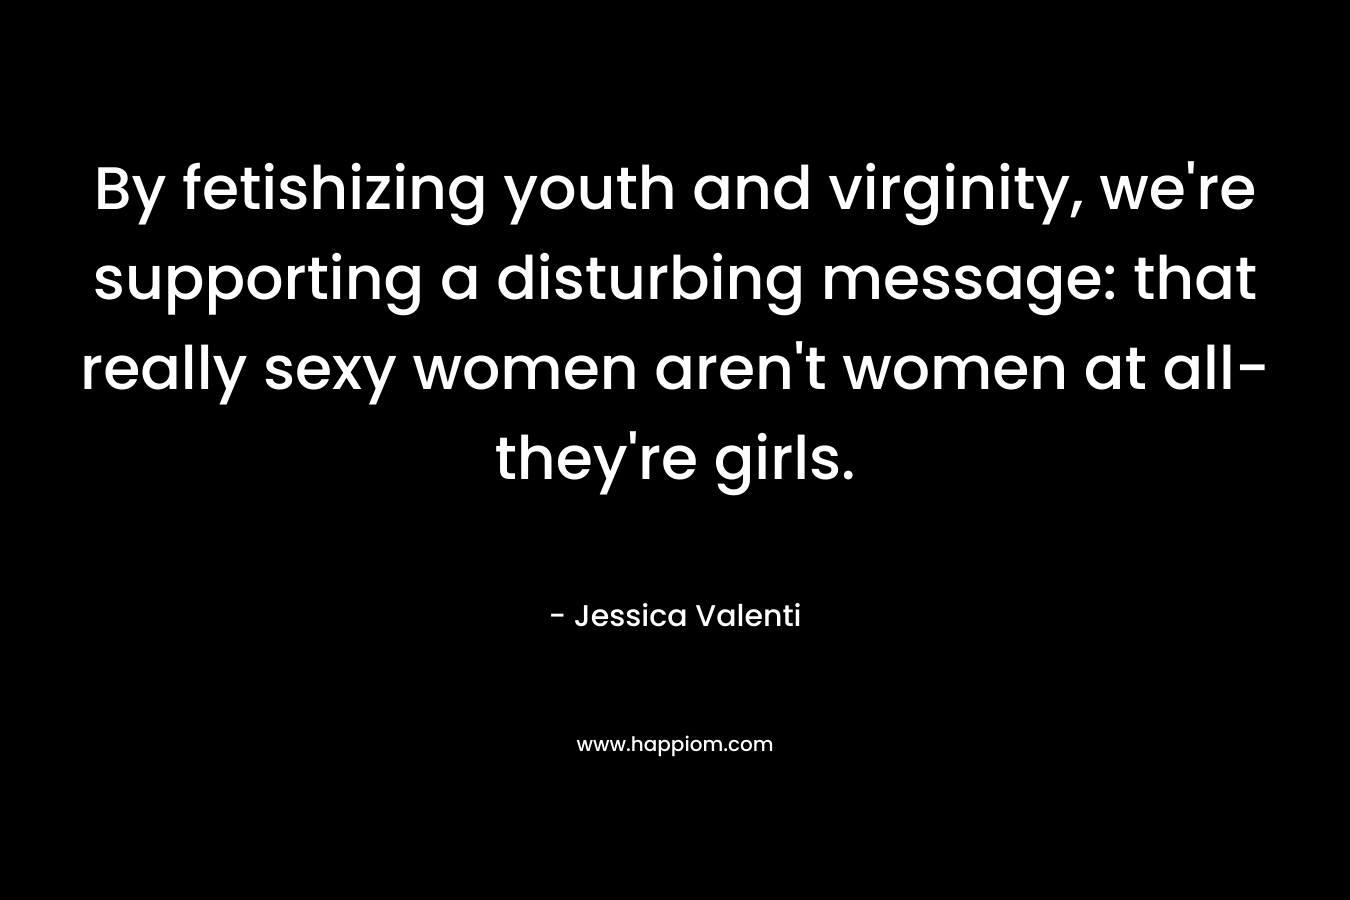 By fetishizing youth and virginity, we're supporting a disturbing message: that really sexy women aren't women at all- they're girls.